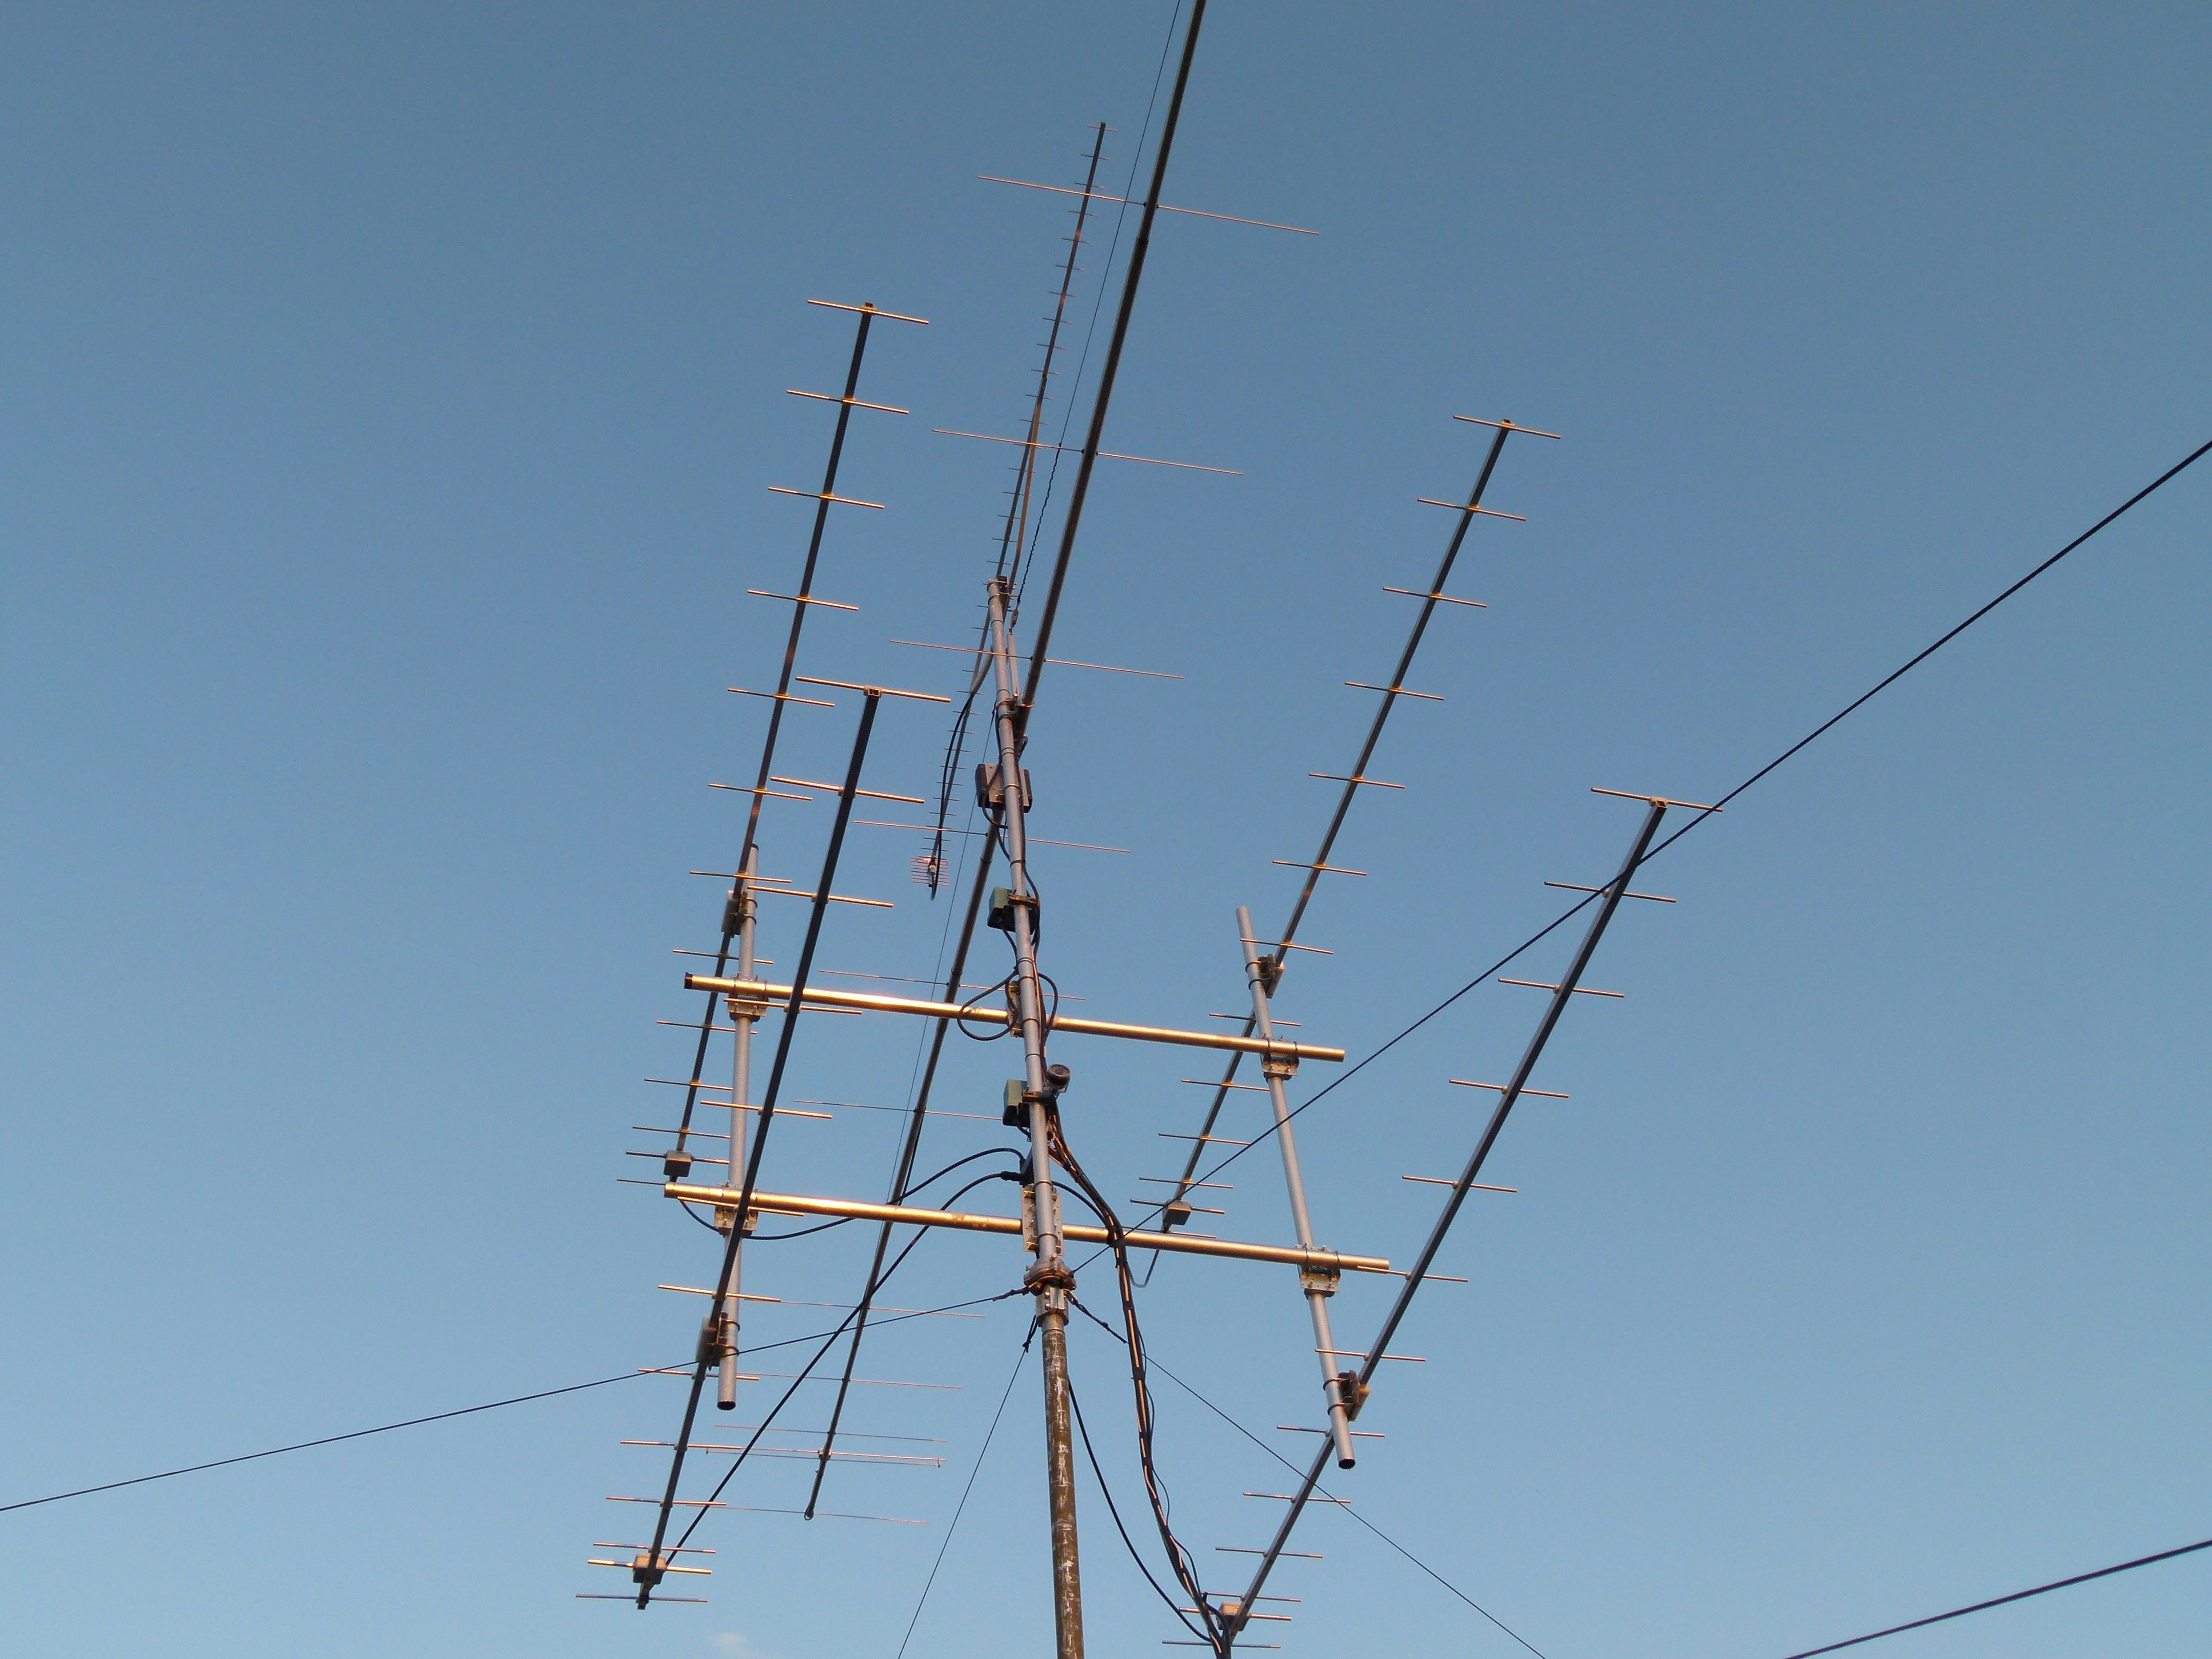 3 bands on one mast.